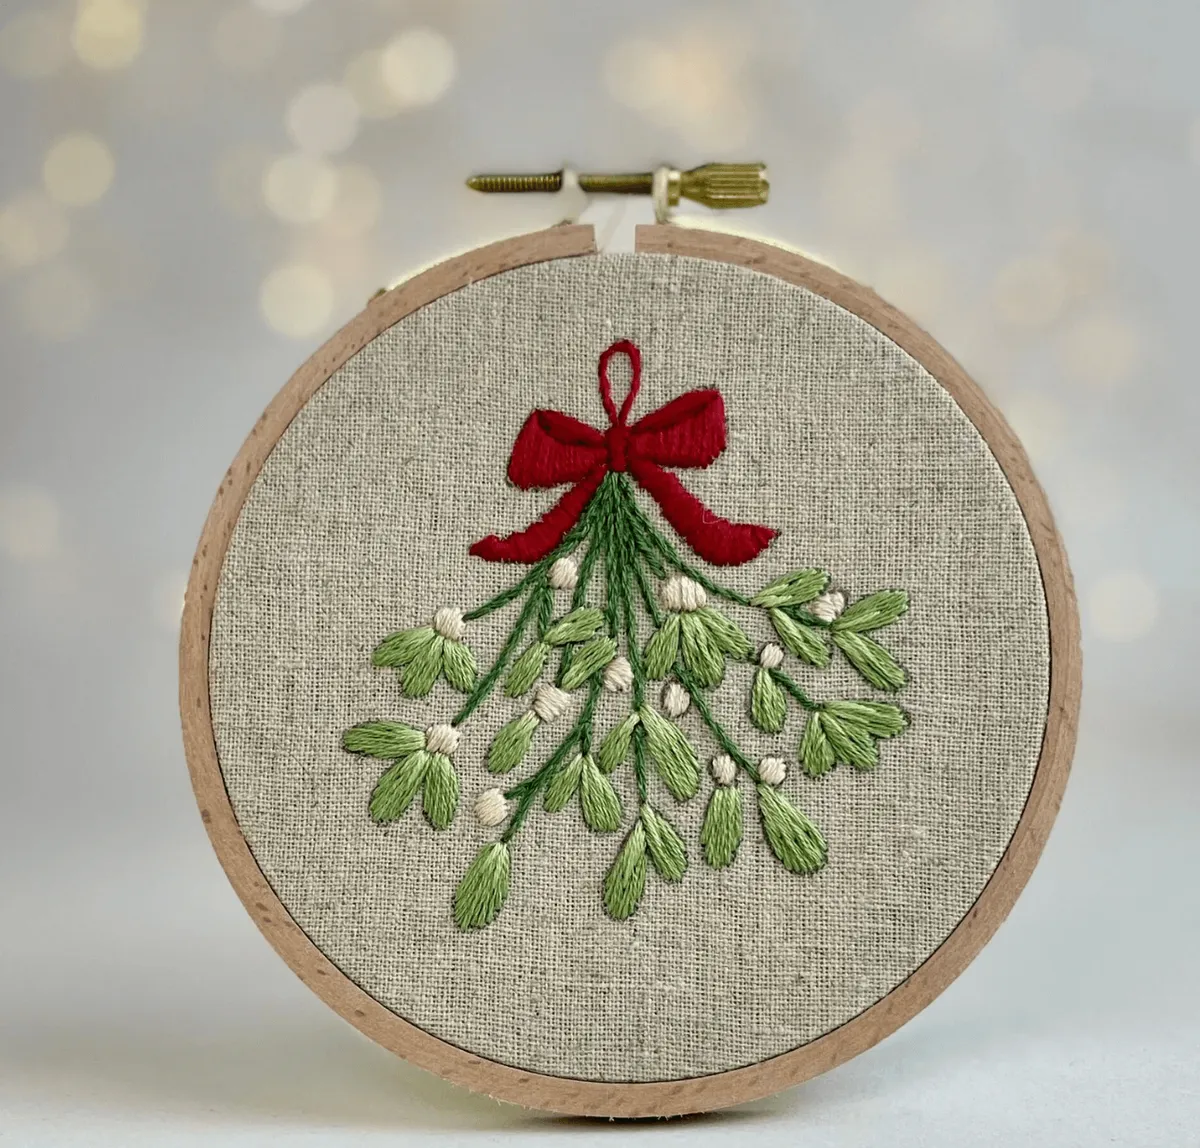 15 small embroidery designs